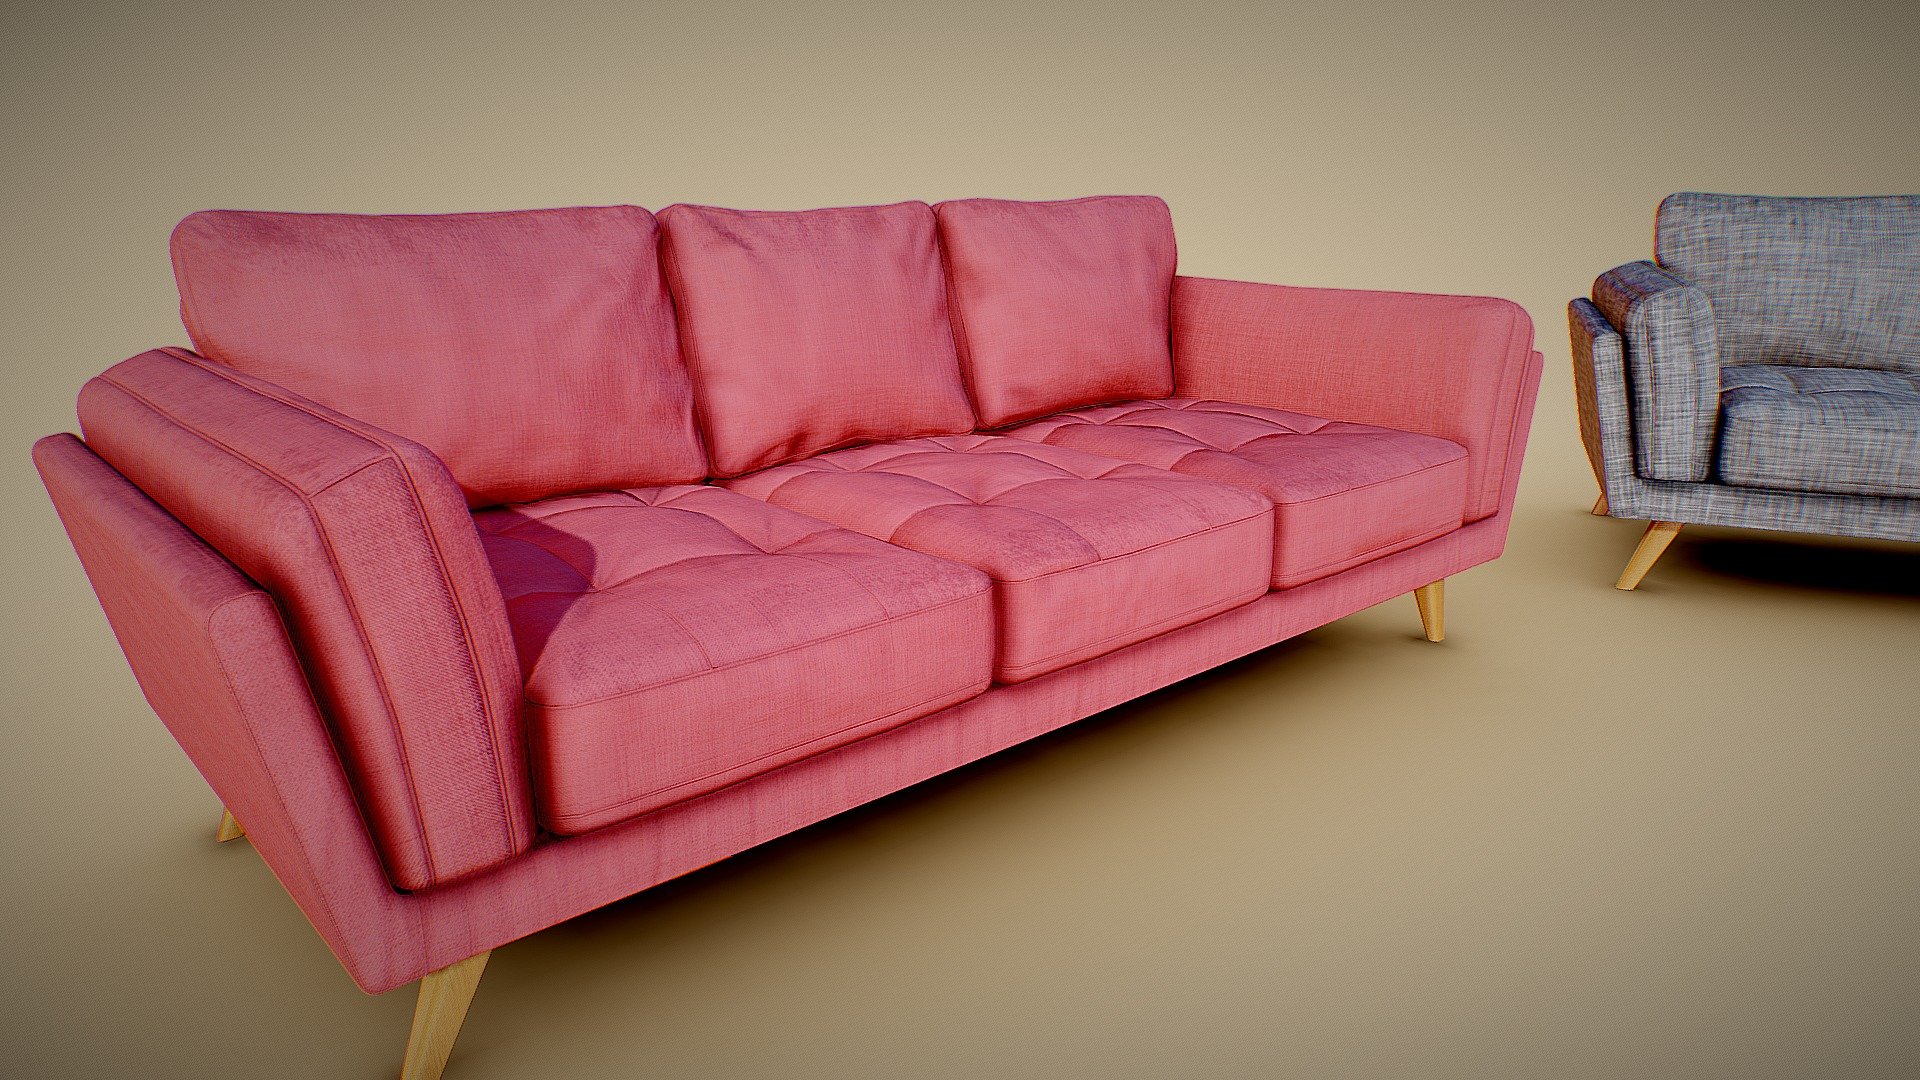 Modern 3 Seater Couch

Low-poly mesh optimised for use in game-engines and real-time arch-viz. Uses 4K normal map on sketchfab (75mb limit) but, a 8k version will be included in the zip. 
Upholstry colour can be adjusted.
Dirt maps are included to add wear &amp; tear for a more realistic or aged look.

Made in Blender 3d model